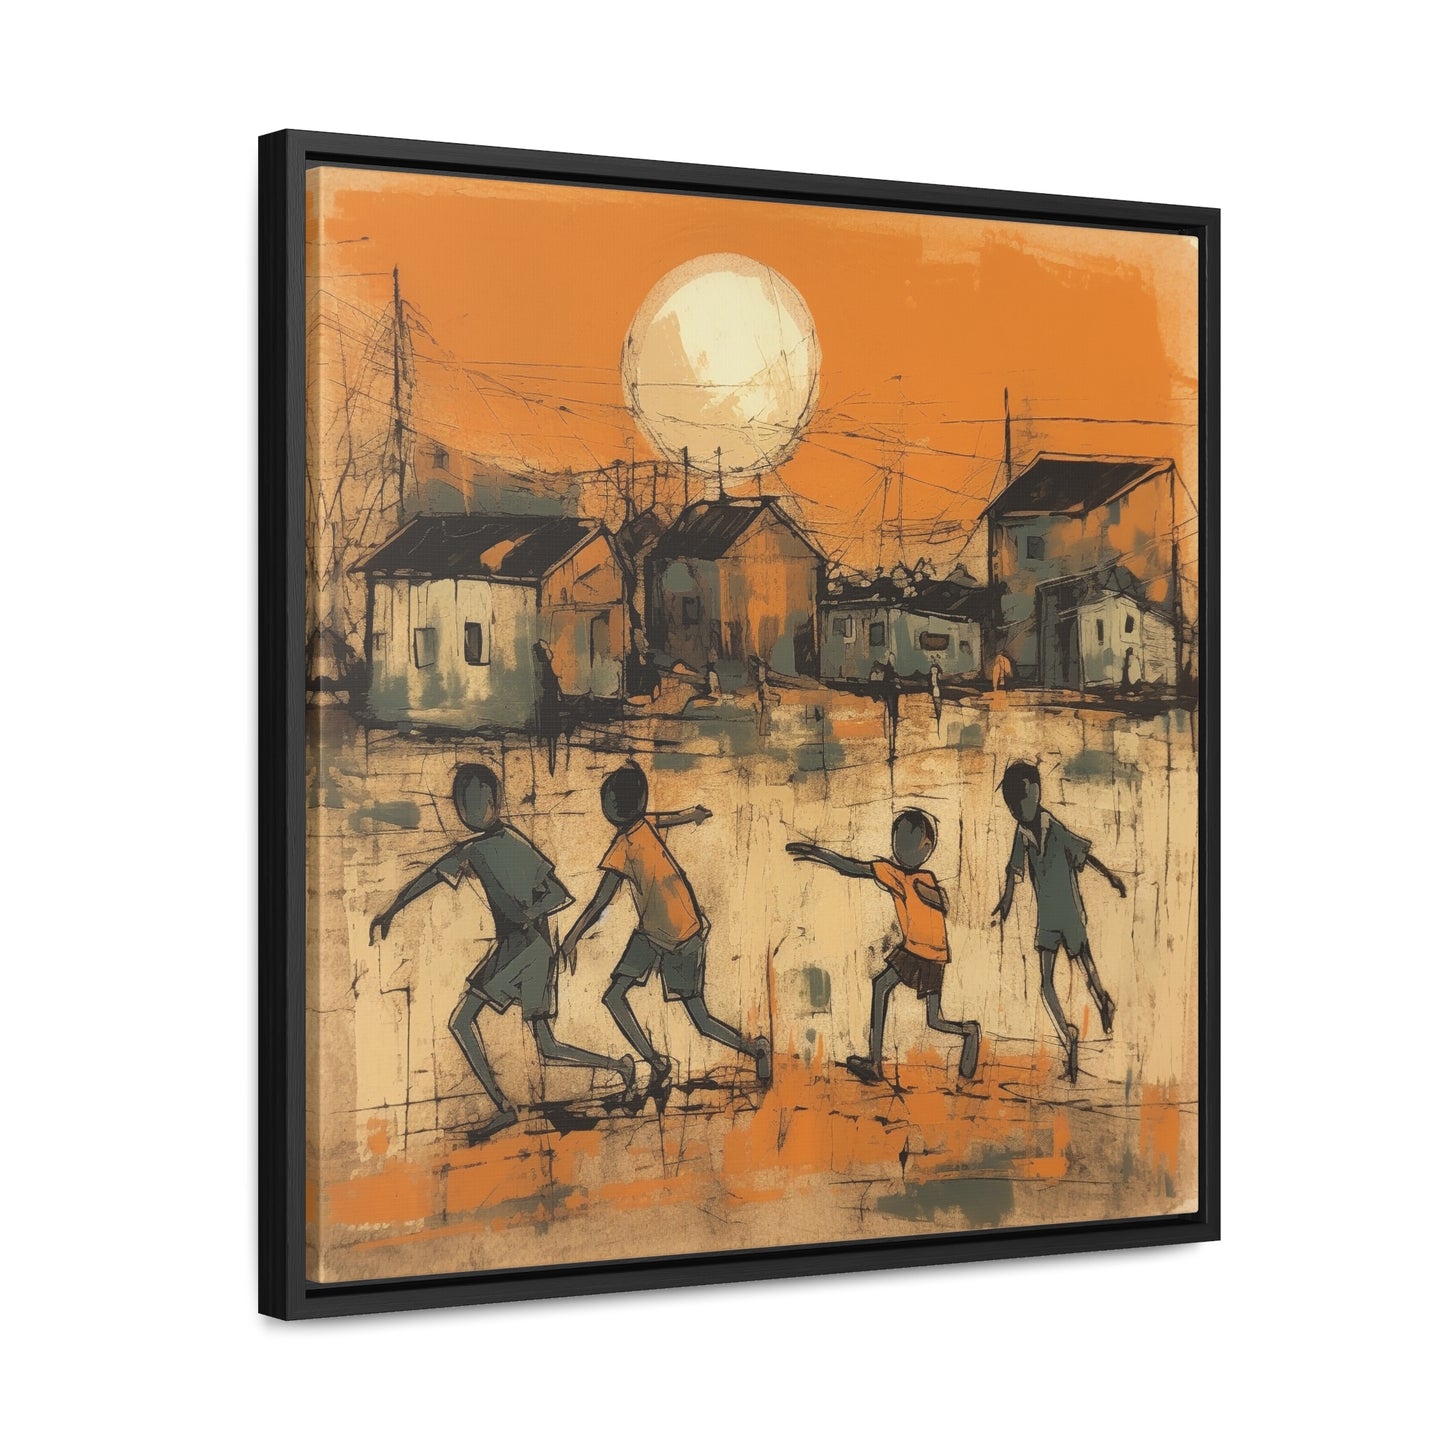 Childhood 25, Gallery Canvas Wraps, Square Frame